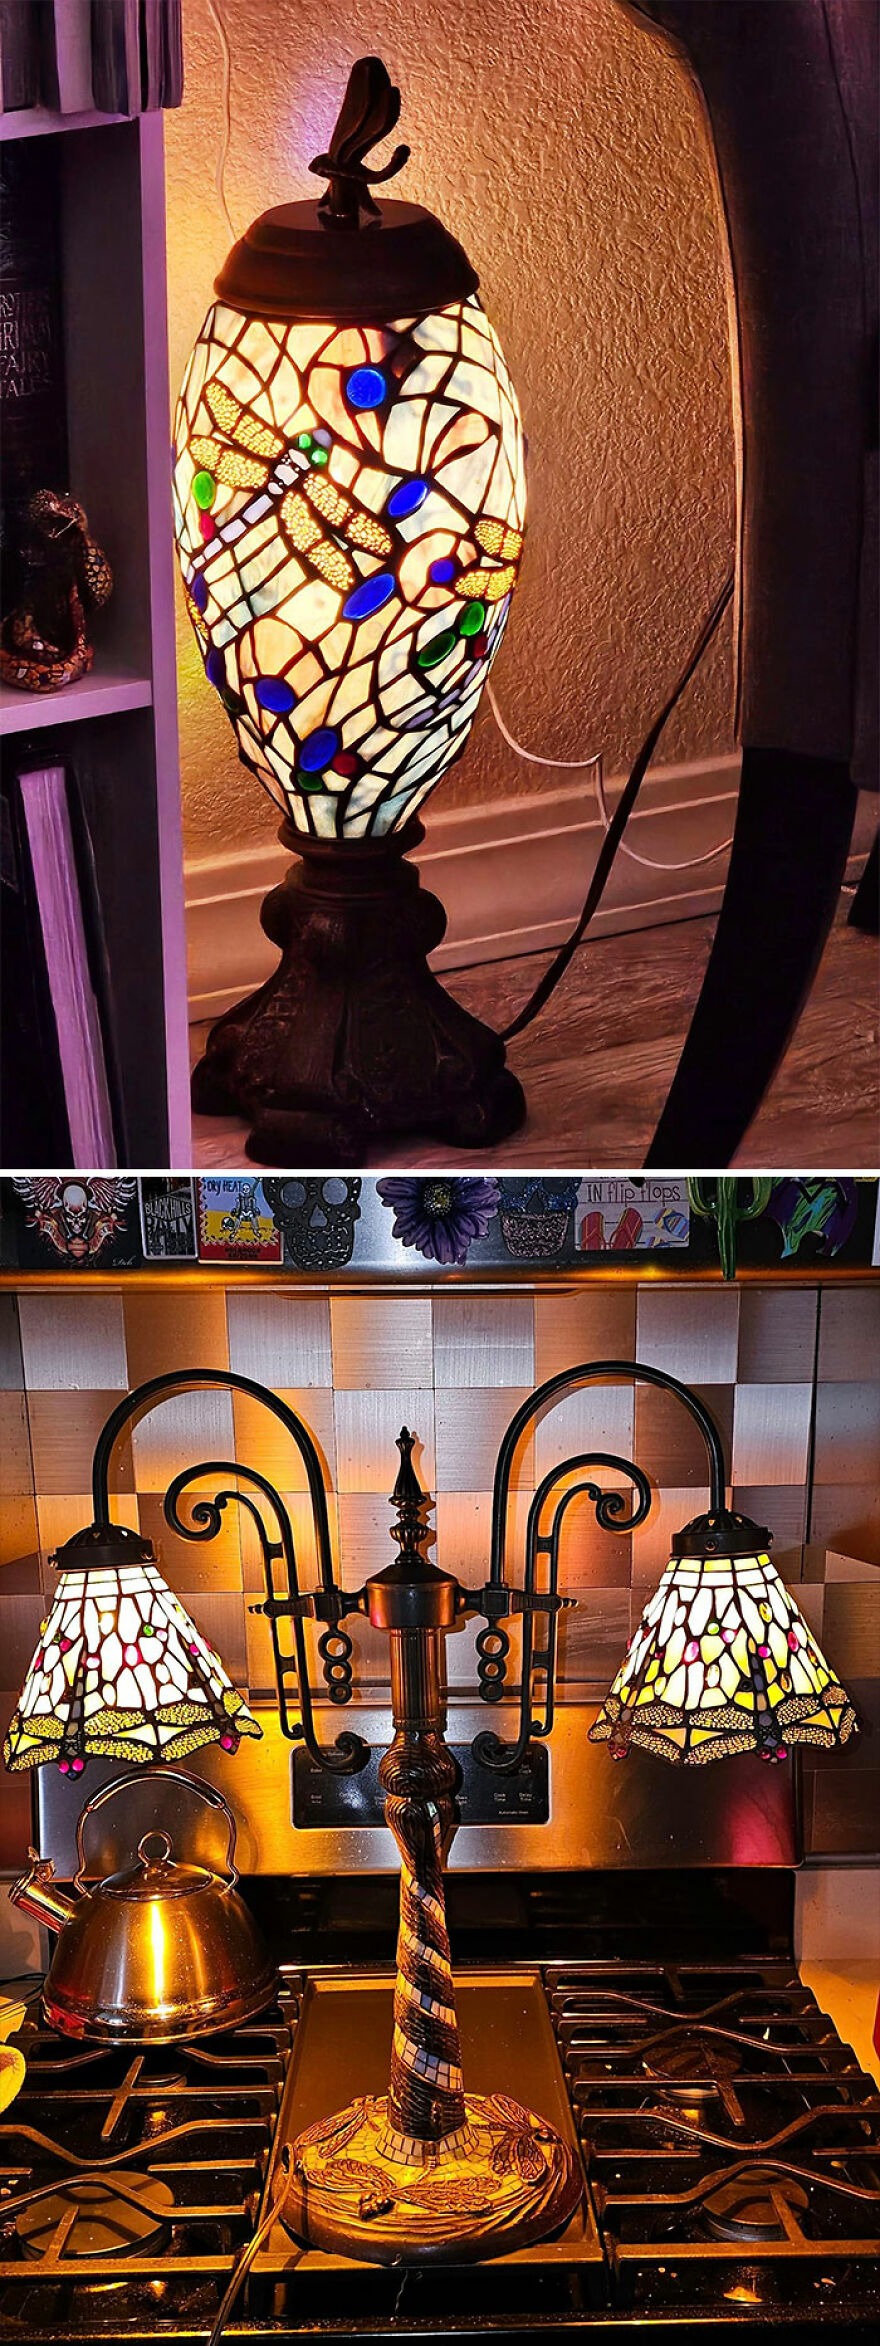 I'm Pretty Excited The Lamp On The Left Was On The Marketplace In Bullhead City, Az For $25 And I Said I Want It I'll Come Get It. She Said Yeah I Was In My Grandma's Stuff We Have One More And I Said Are You Selling It She Said Sure And She Brought It Out 25 Bucks... They Were Very Very Dirty. But I Think It's An Excellent Score